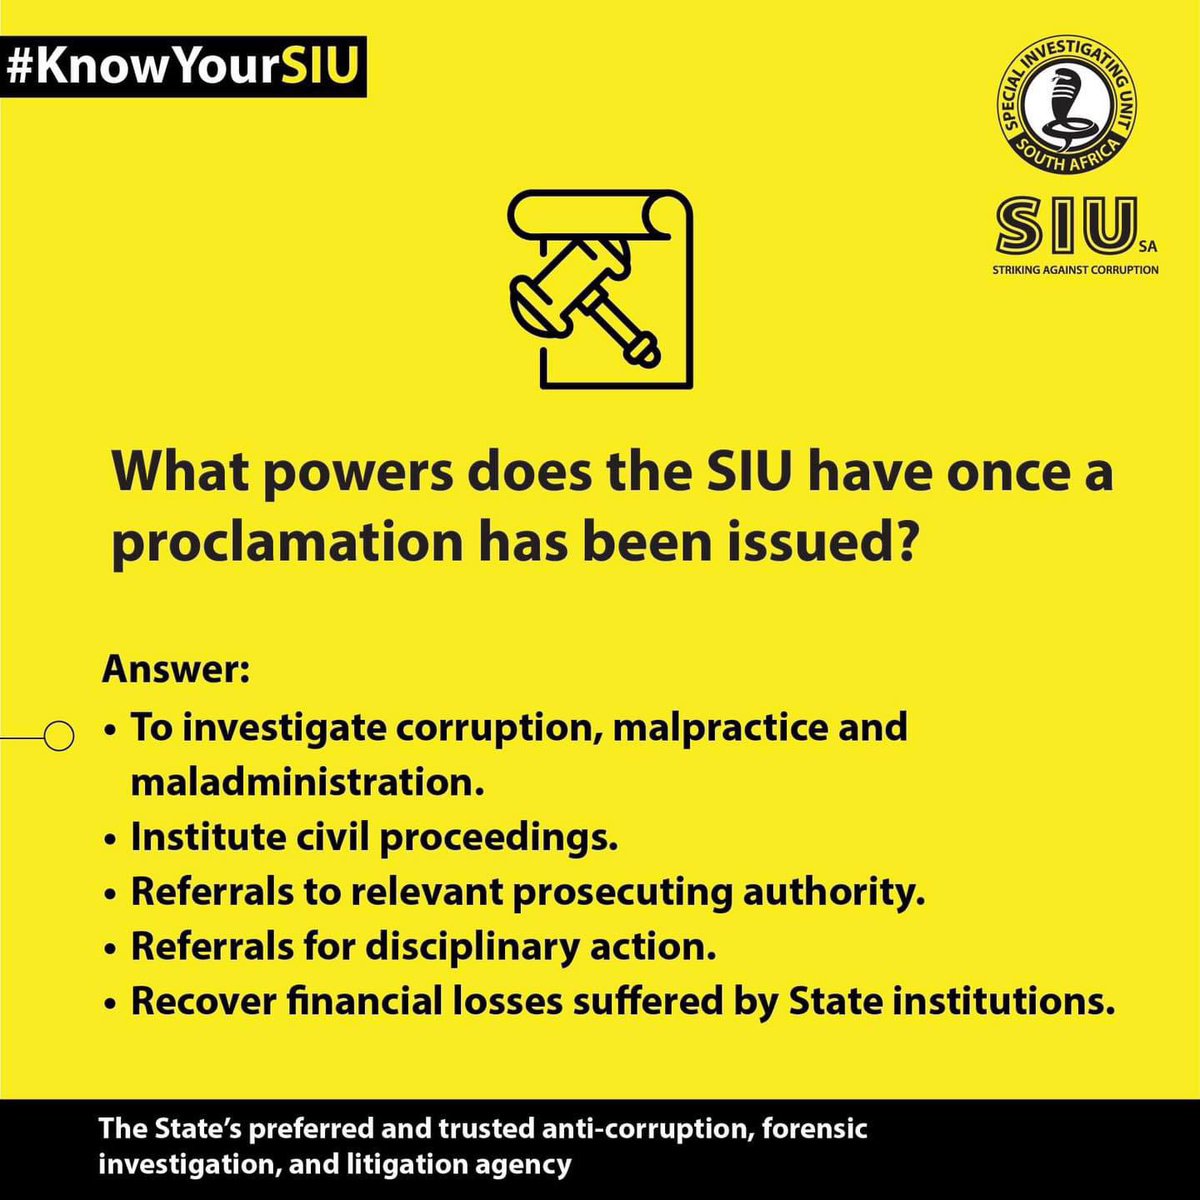 #KnowYourSIU | What powers does the SIU have once a proclamation has been issued?